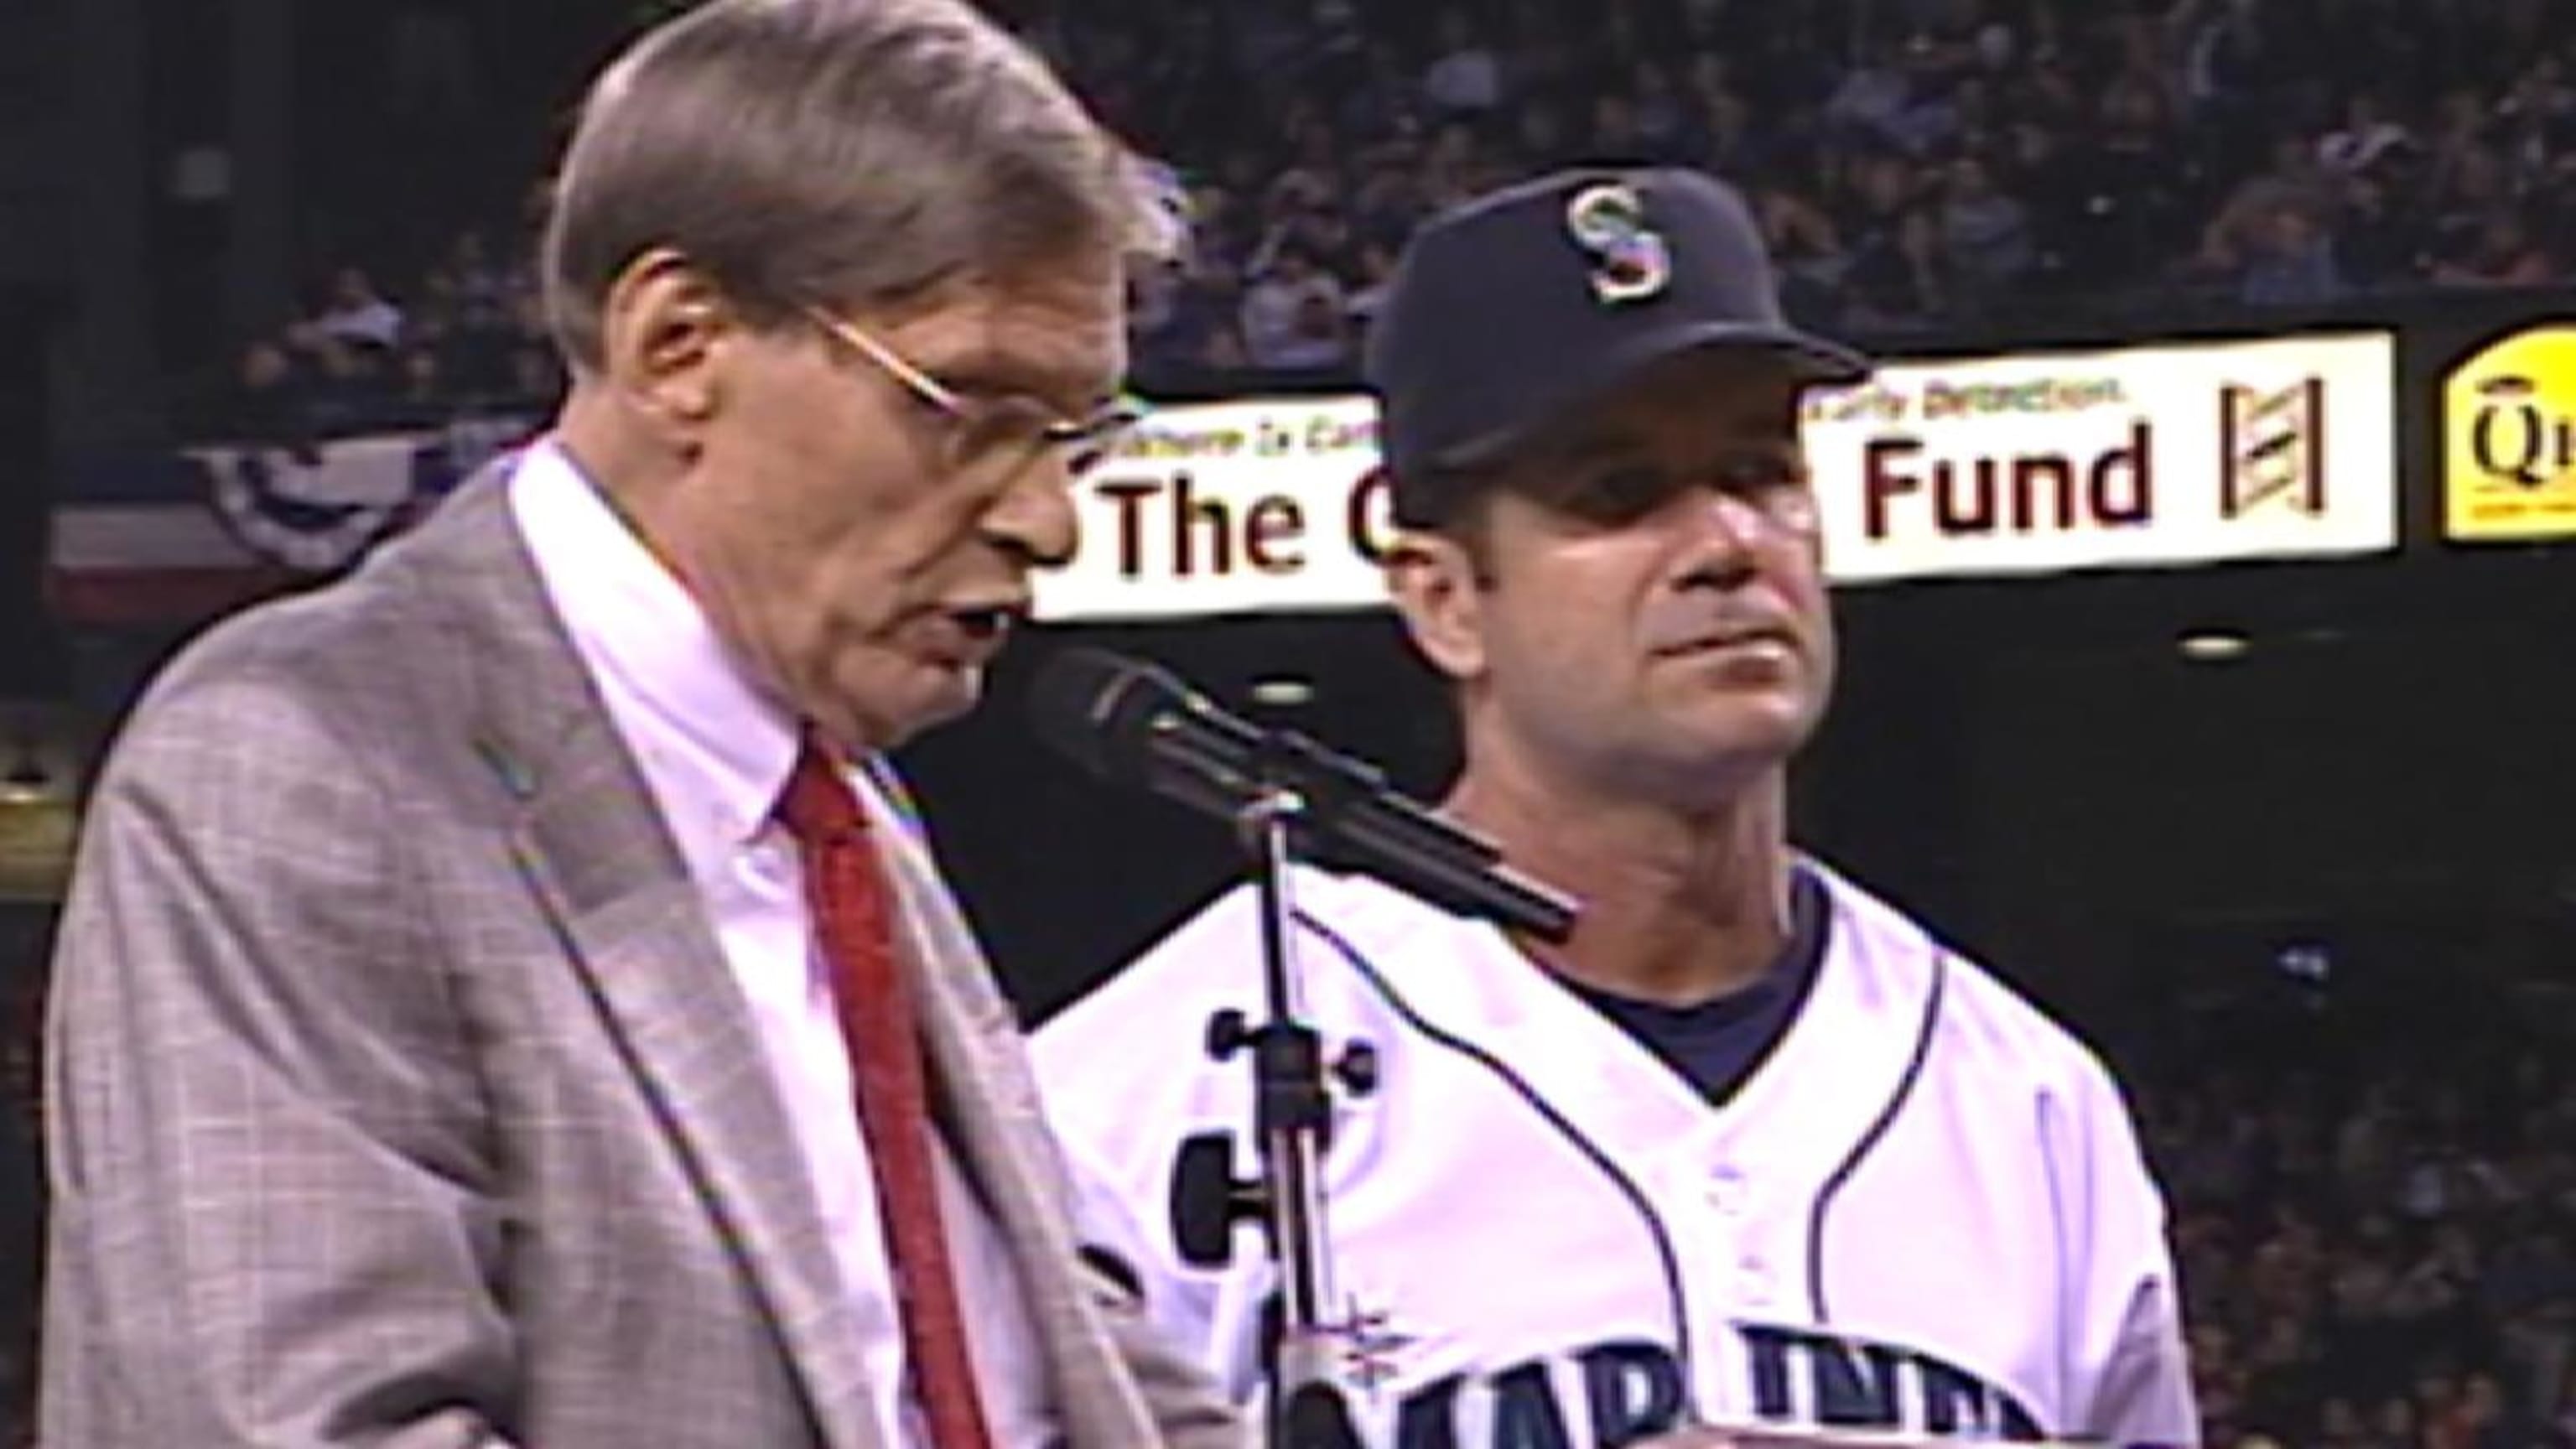 Edgar Martinez's best moments on his path to the Hall of Fame